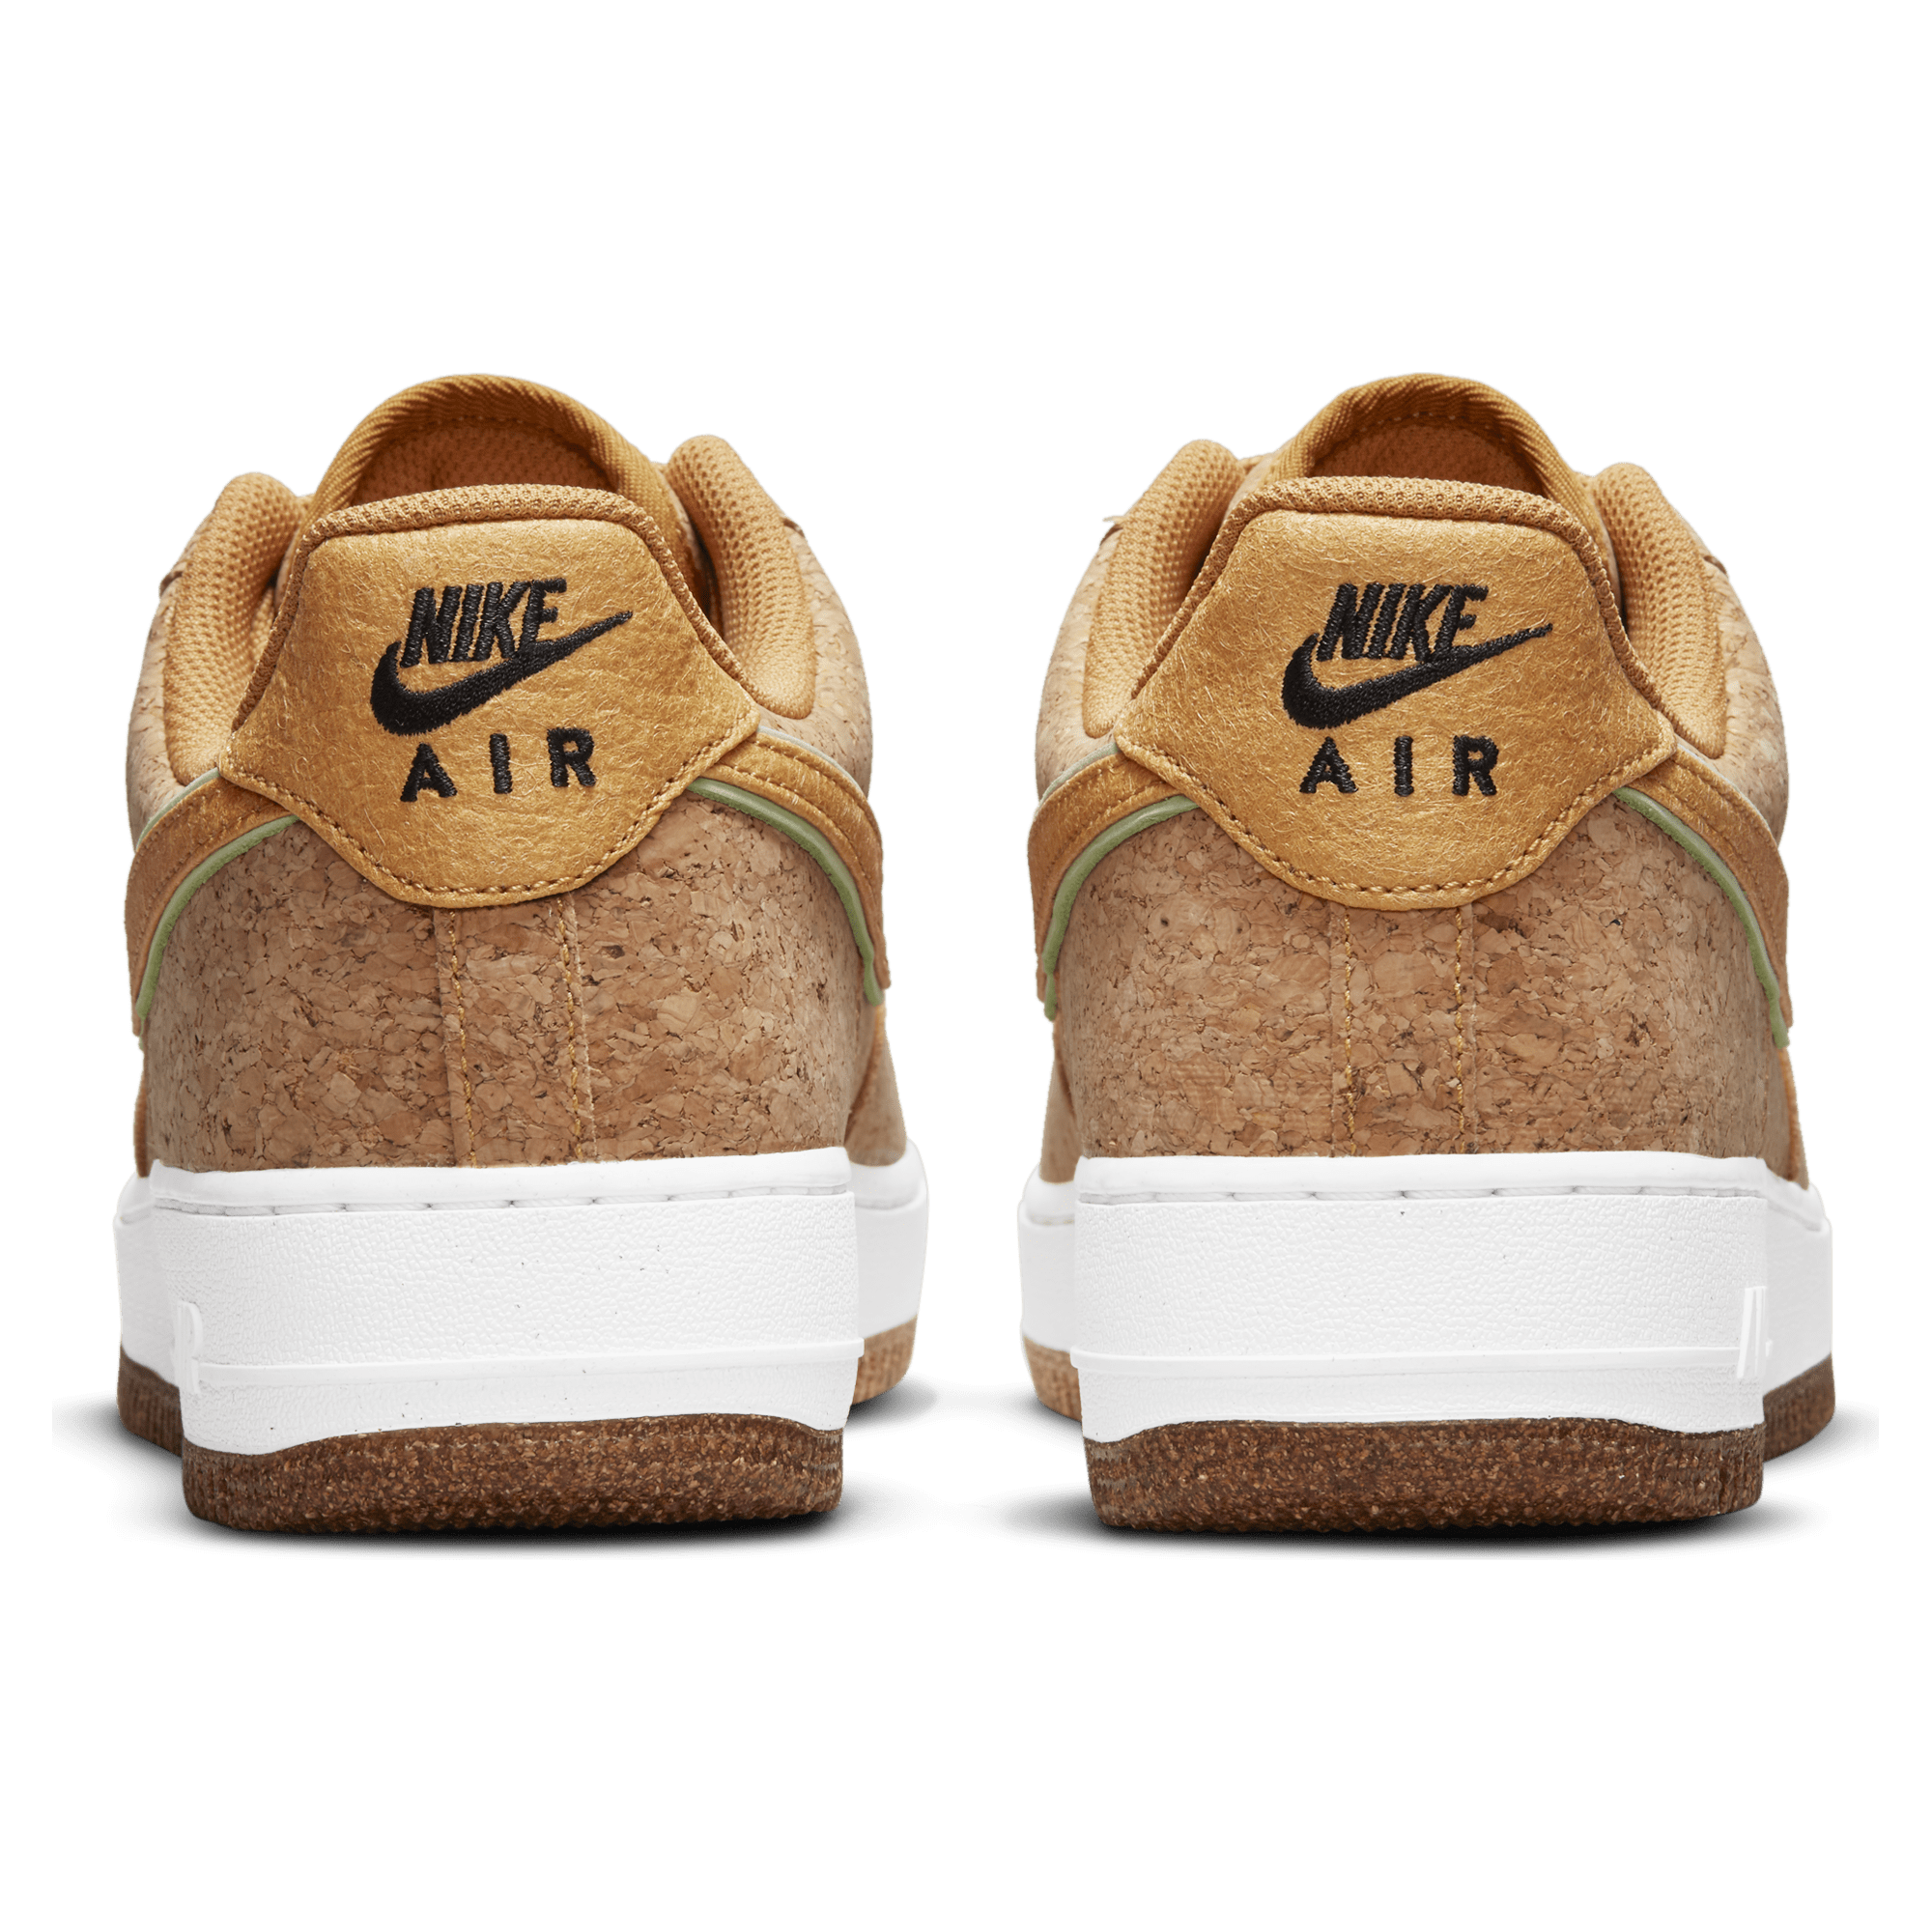 Nike Fit Out the Air Force 1 With Rose Gold Swooshes